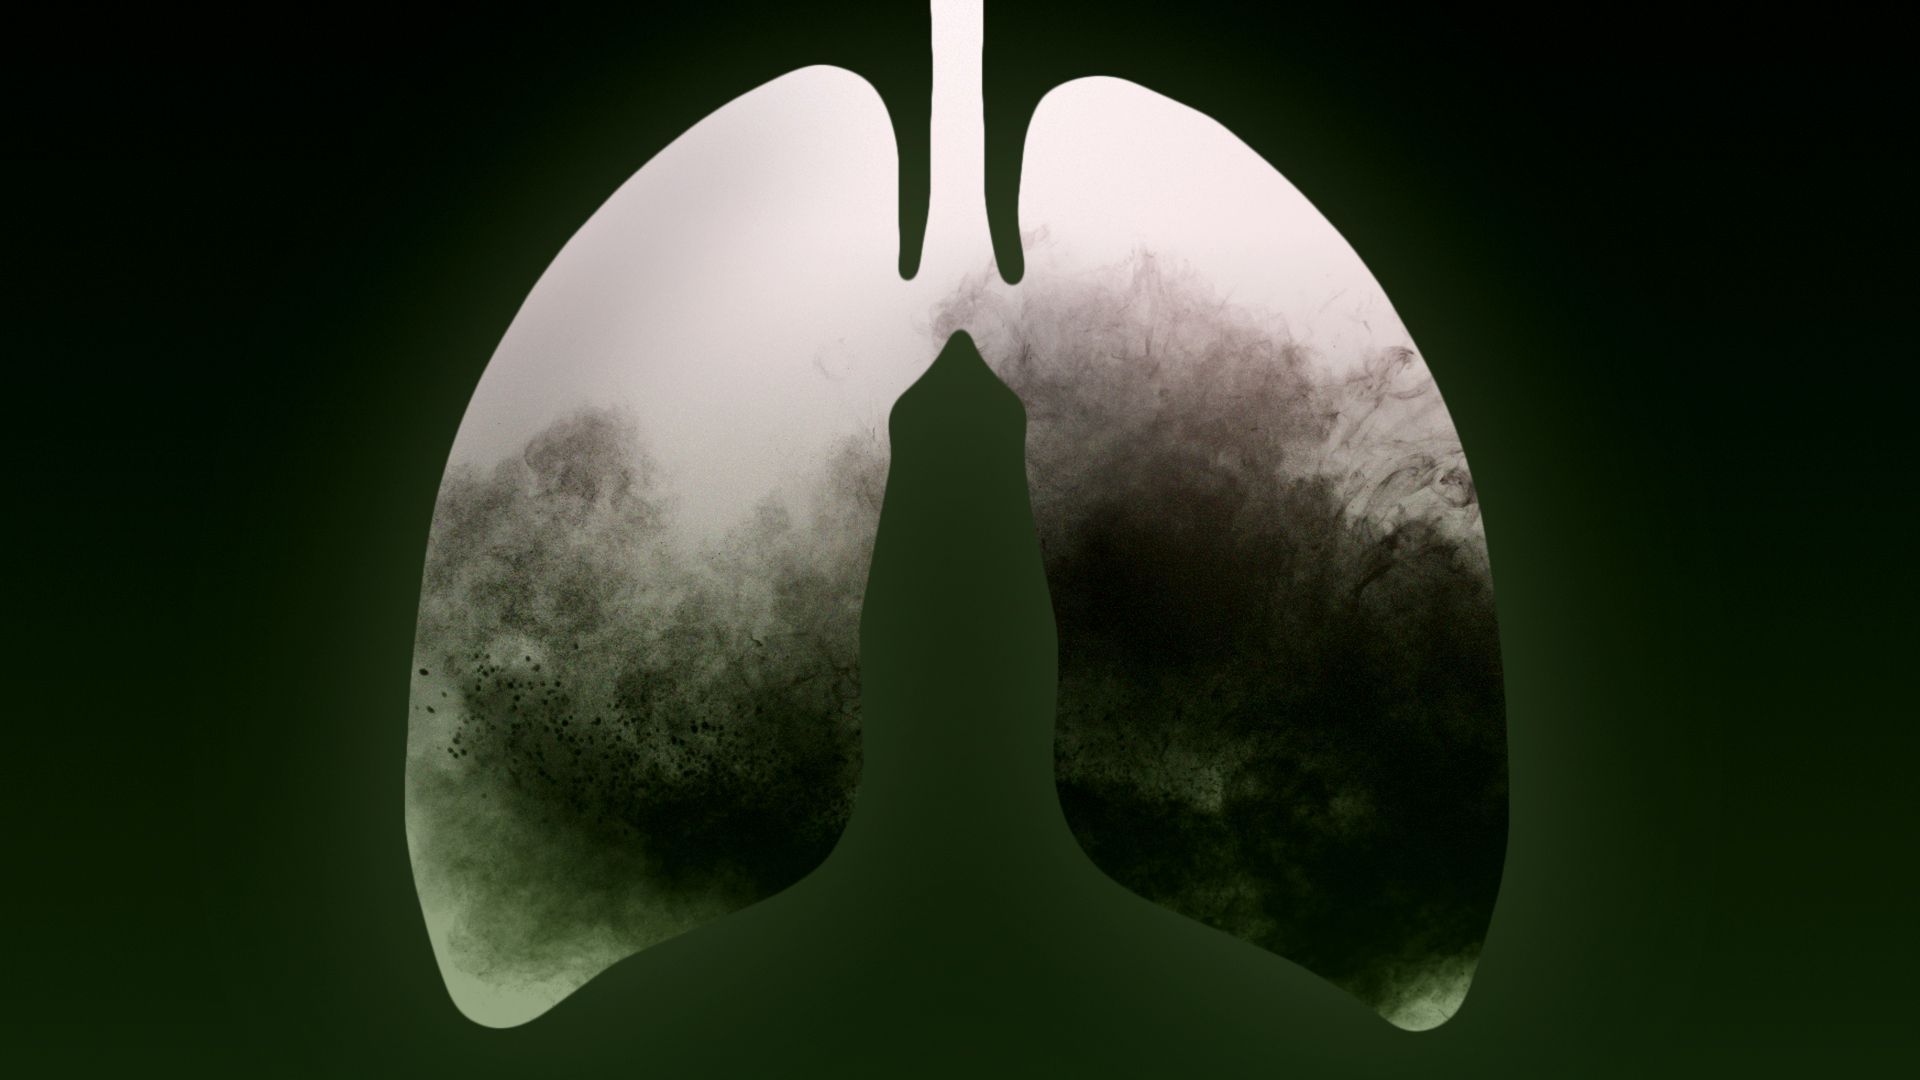 Illustration of a silhouette of lungs filled with green and black smogs and exhaust clouds